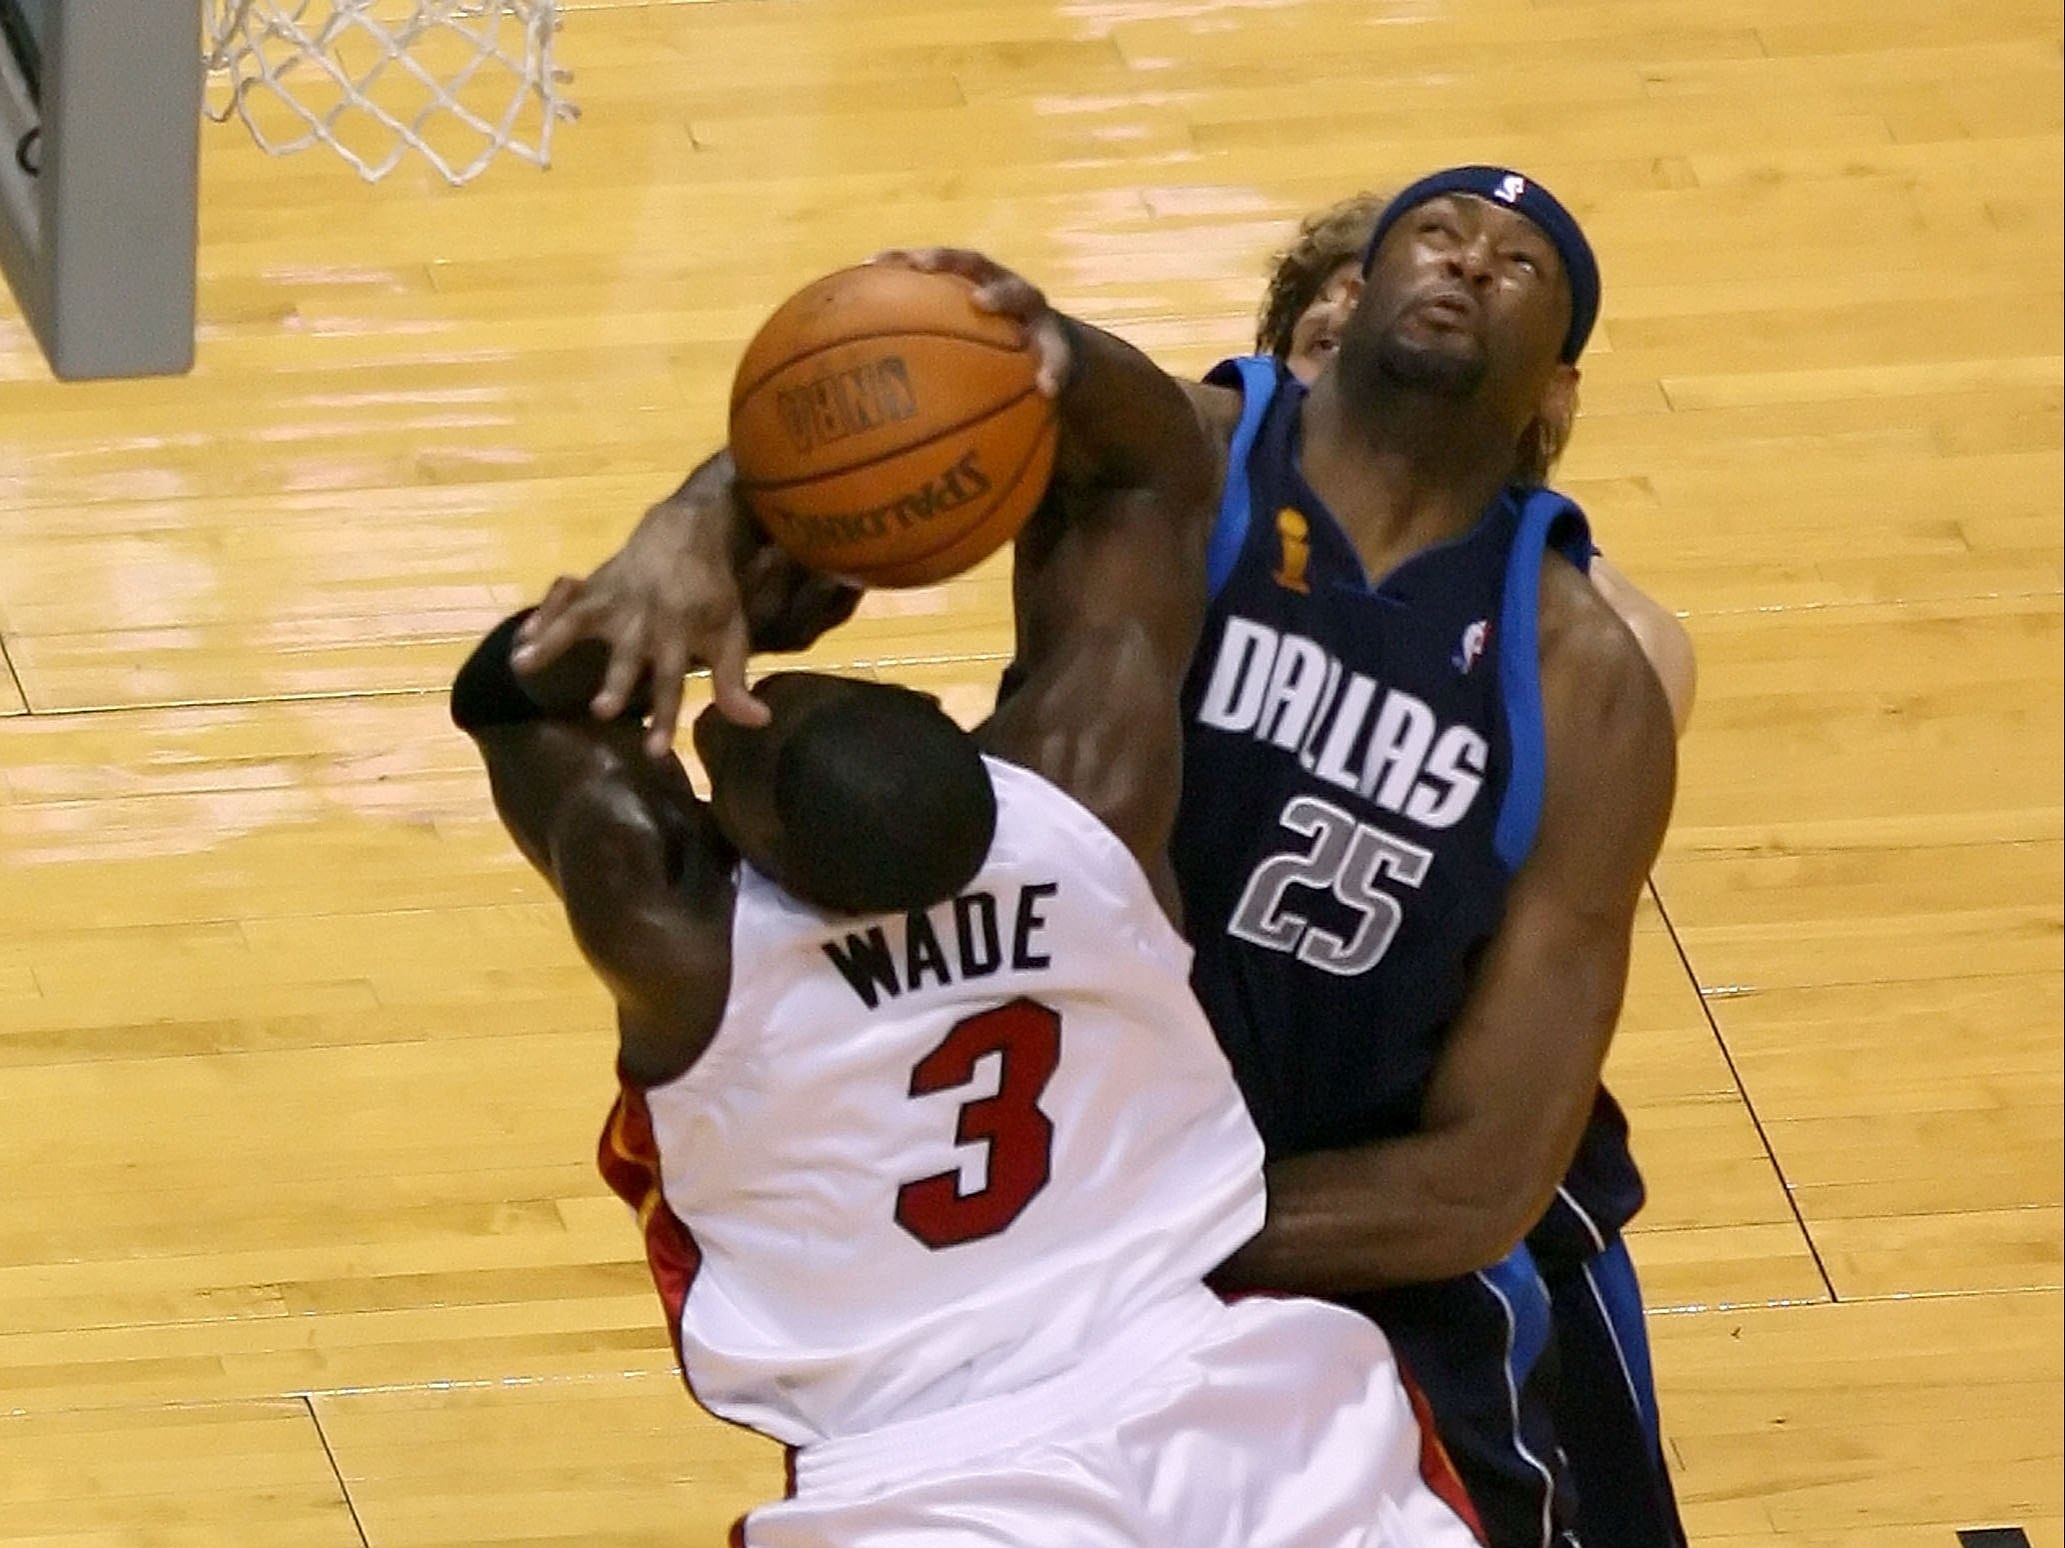 Dwyane Wade getting fouled by Eric Dampier in the NBA Finals.